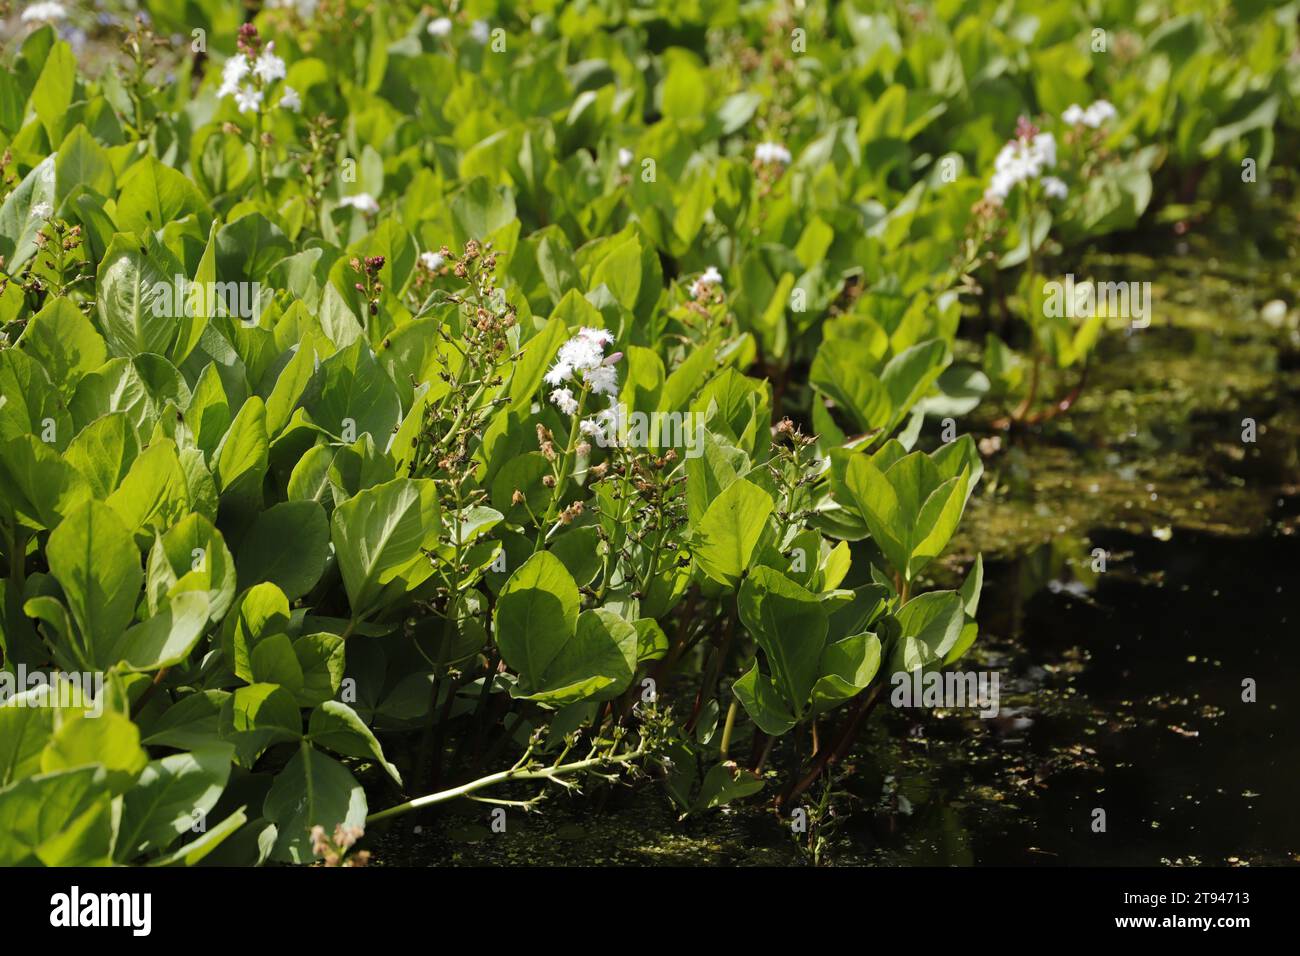 mallotus japonicus plant with white flowers Stock Photo